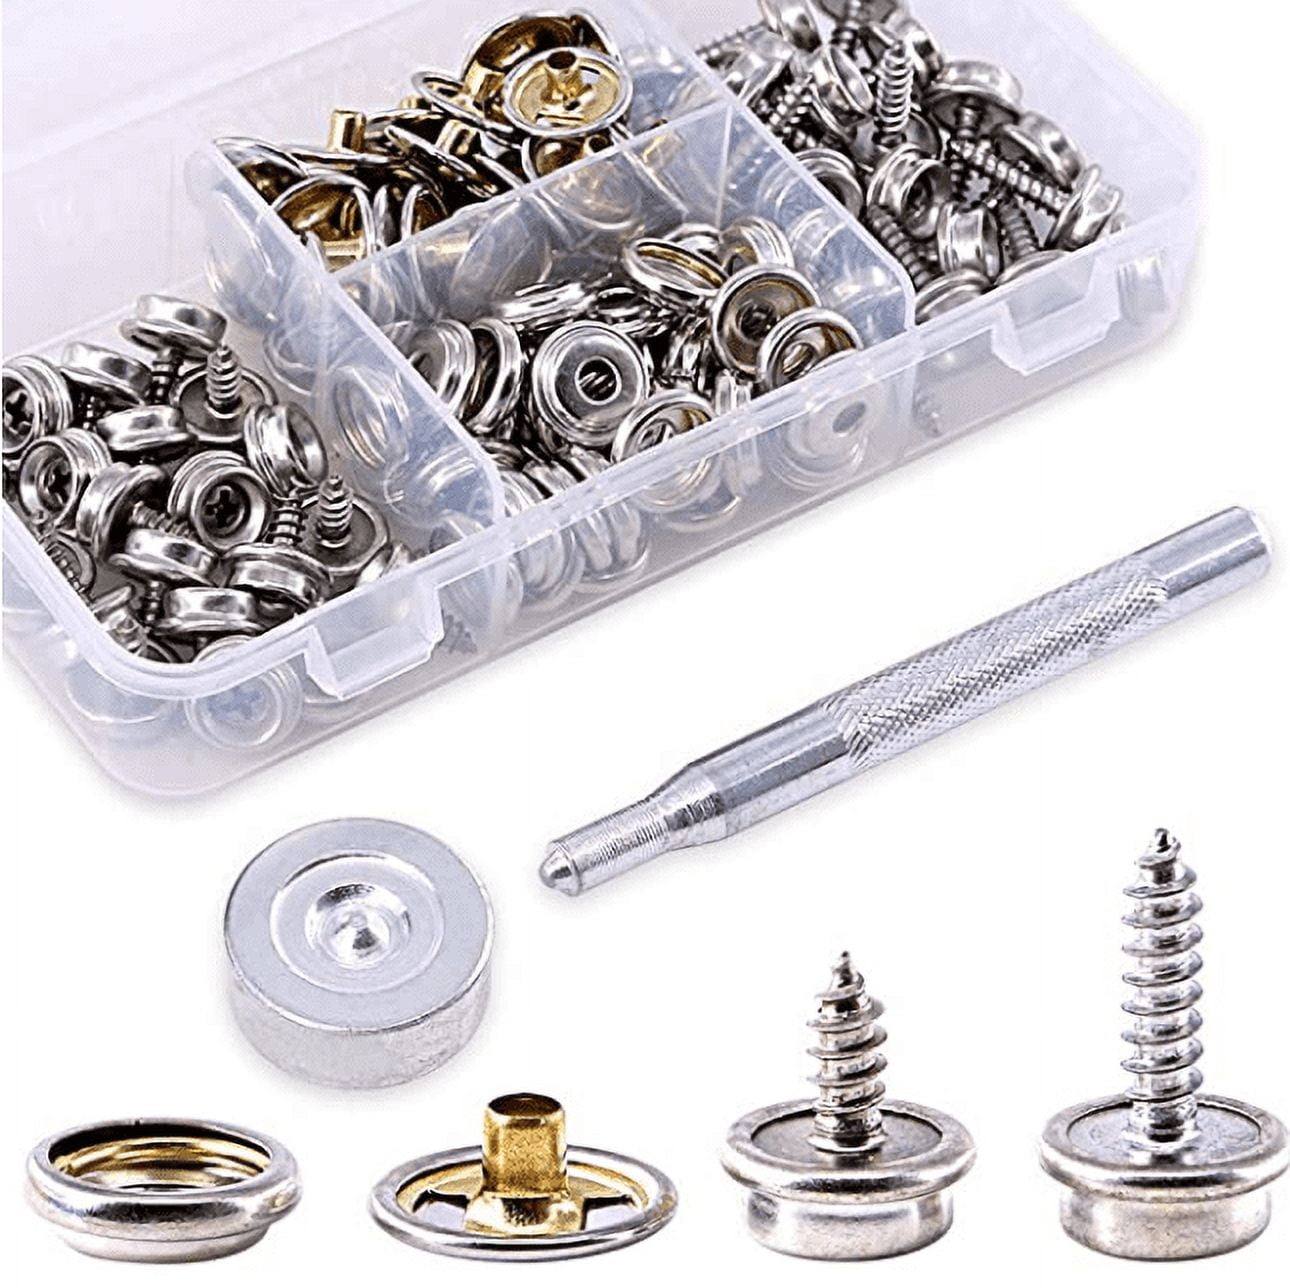 323 Piece Canvas Snap Kit, Meifuly Marine Grade Stainless Steel (Caps,  Sockets, Screws, Fabric Base Components) for DIY Cover, Canvas Snap Kit  with